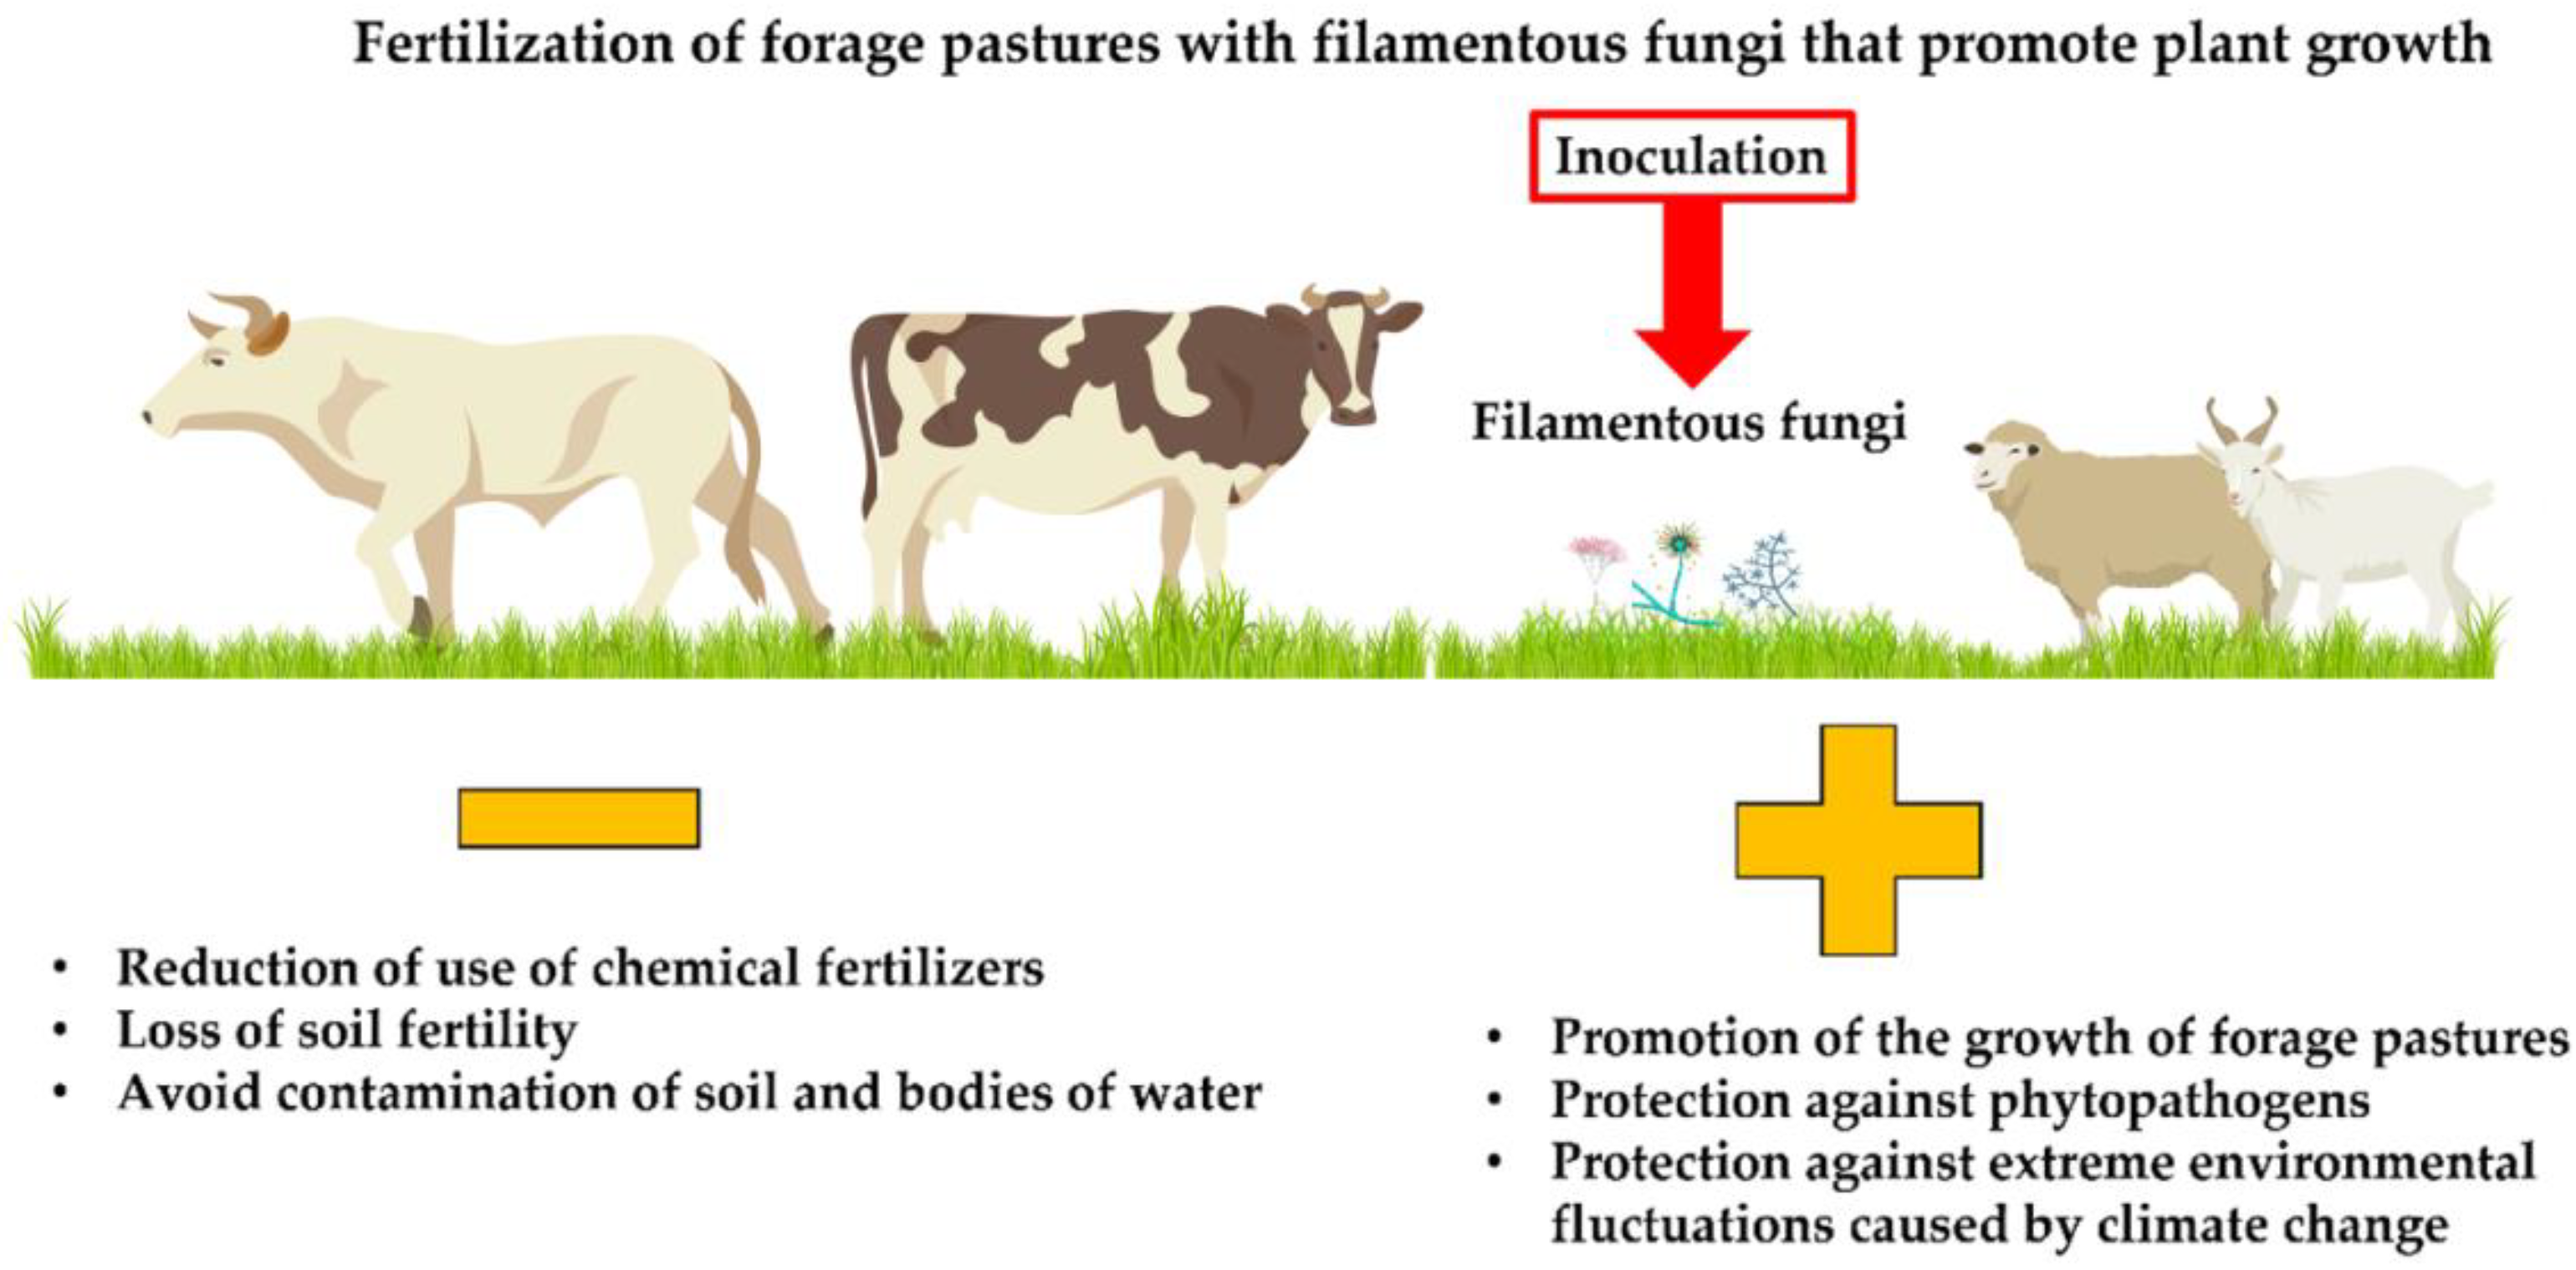 Agronomy | Free Full-Text | Plant Growth Promoting Filamentous Fungi and  Their Application in the Fertilization of Pastures for Animal Consumption